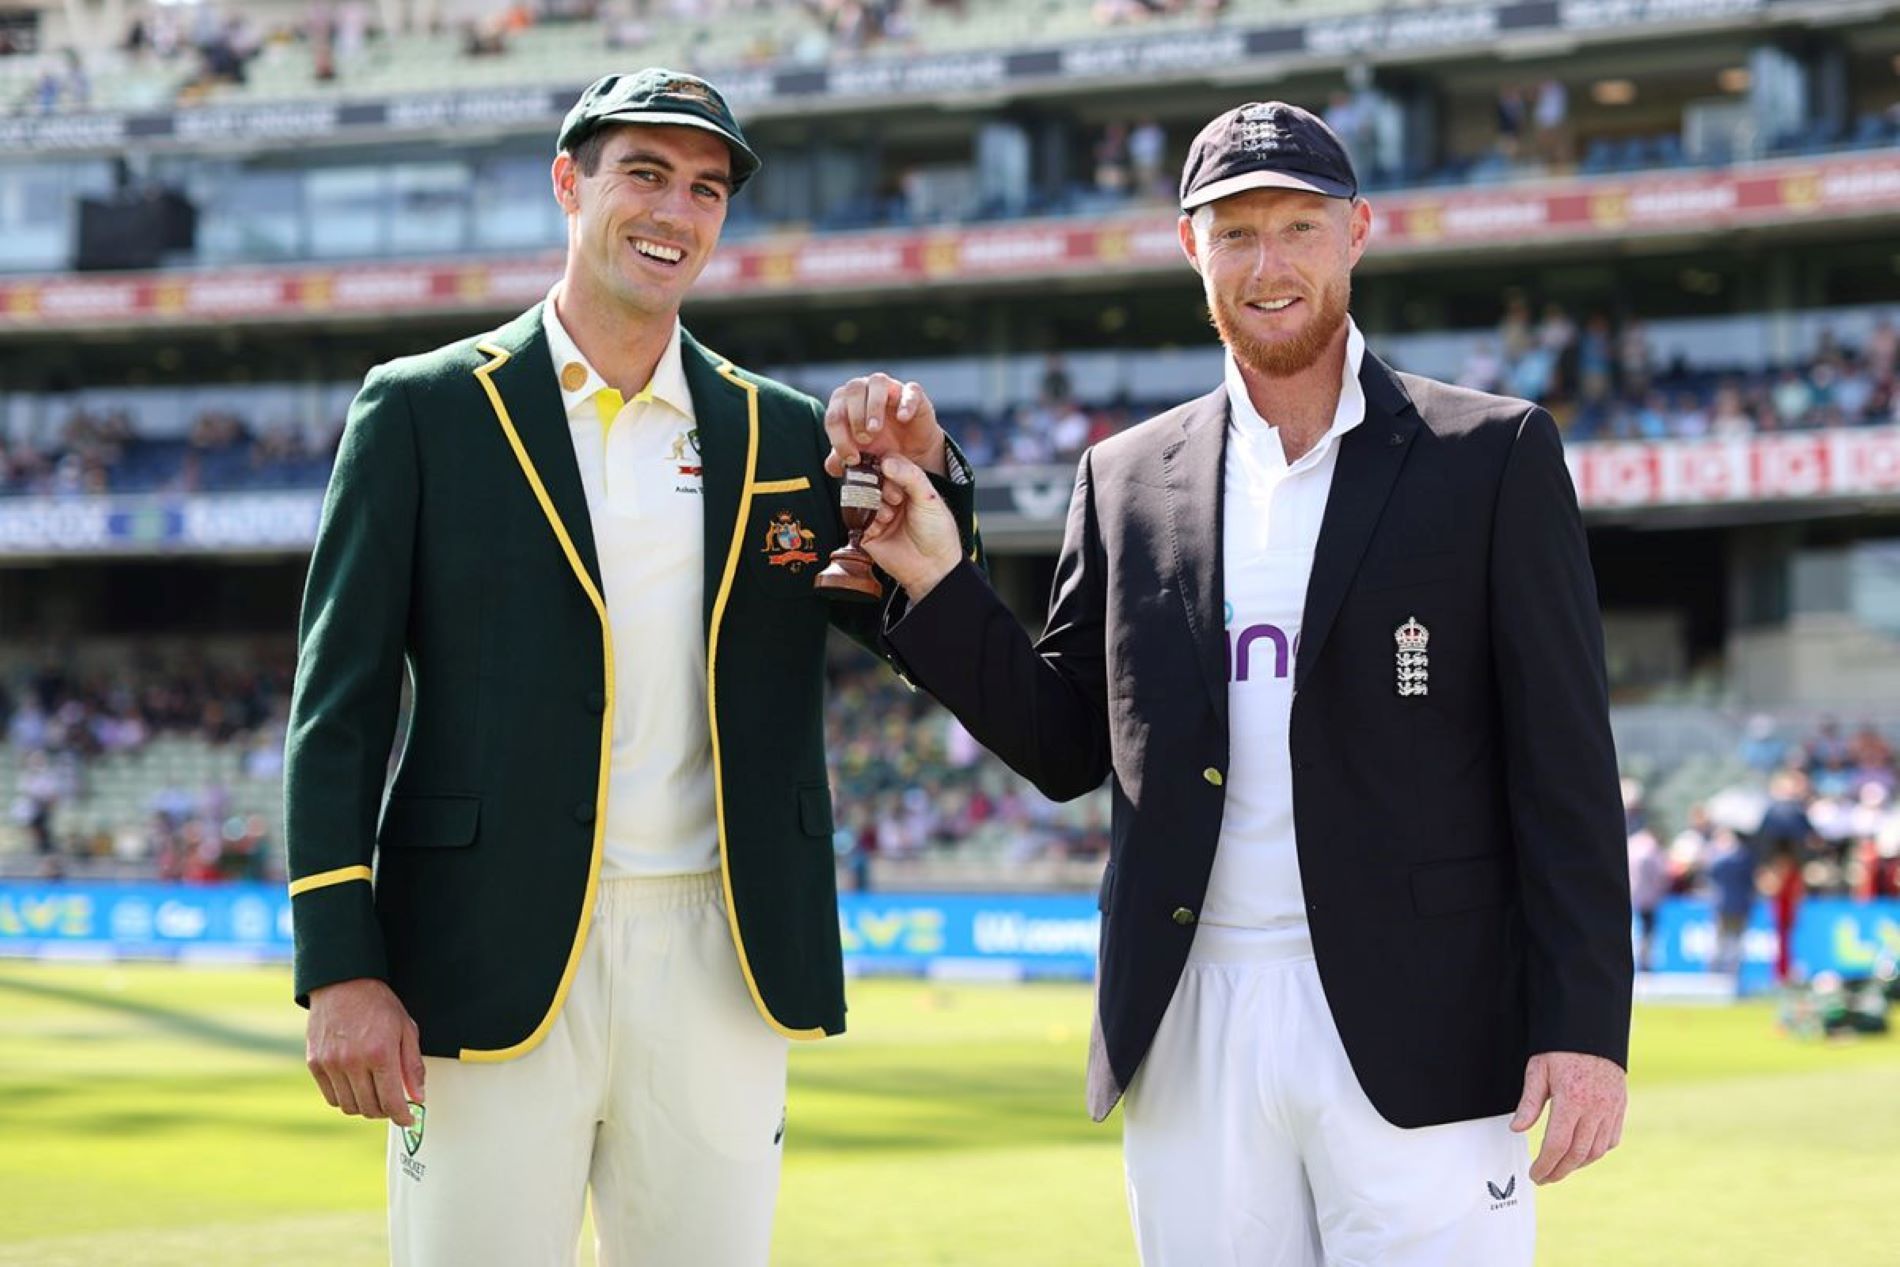 Pat Cummins and Ben Stokes pose with the Ashes urn ahead of the first Ashes Test